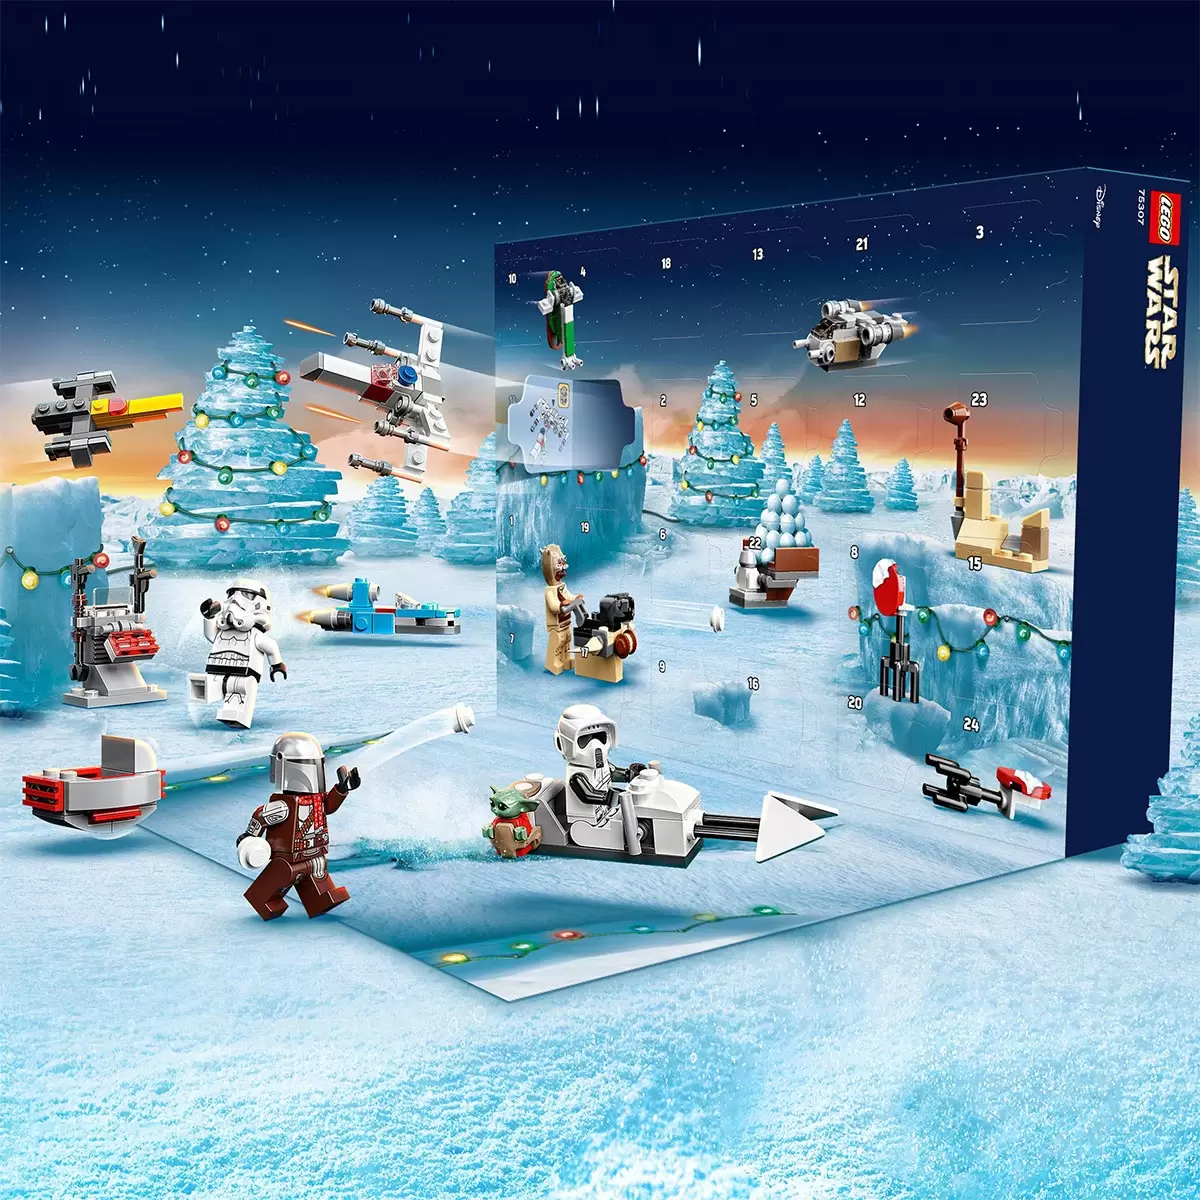 Buy LEGO Star Wars Advent Calendar Features3 Image at Costco.co.uk